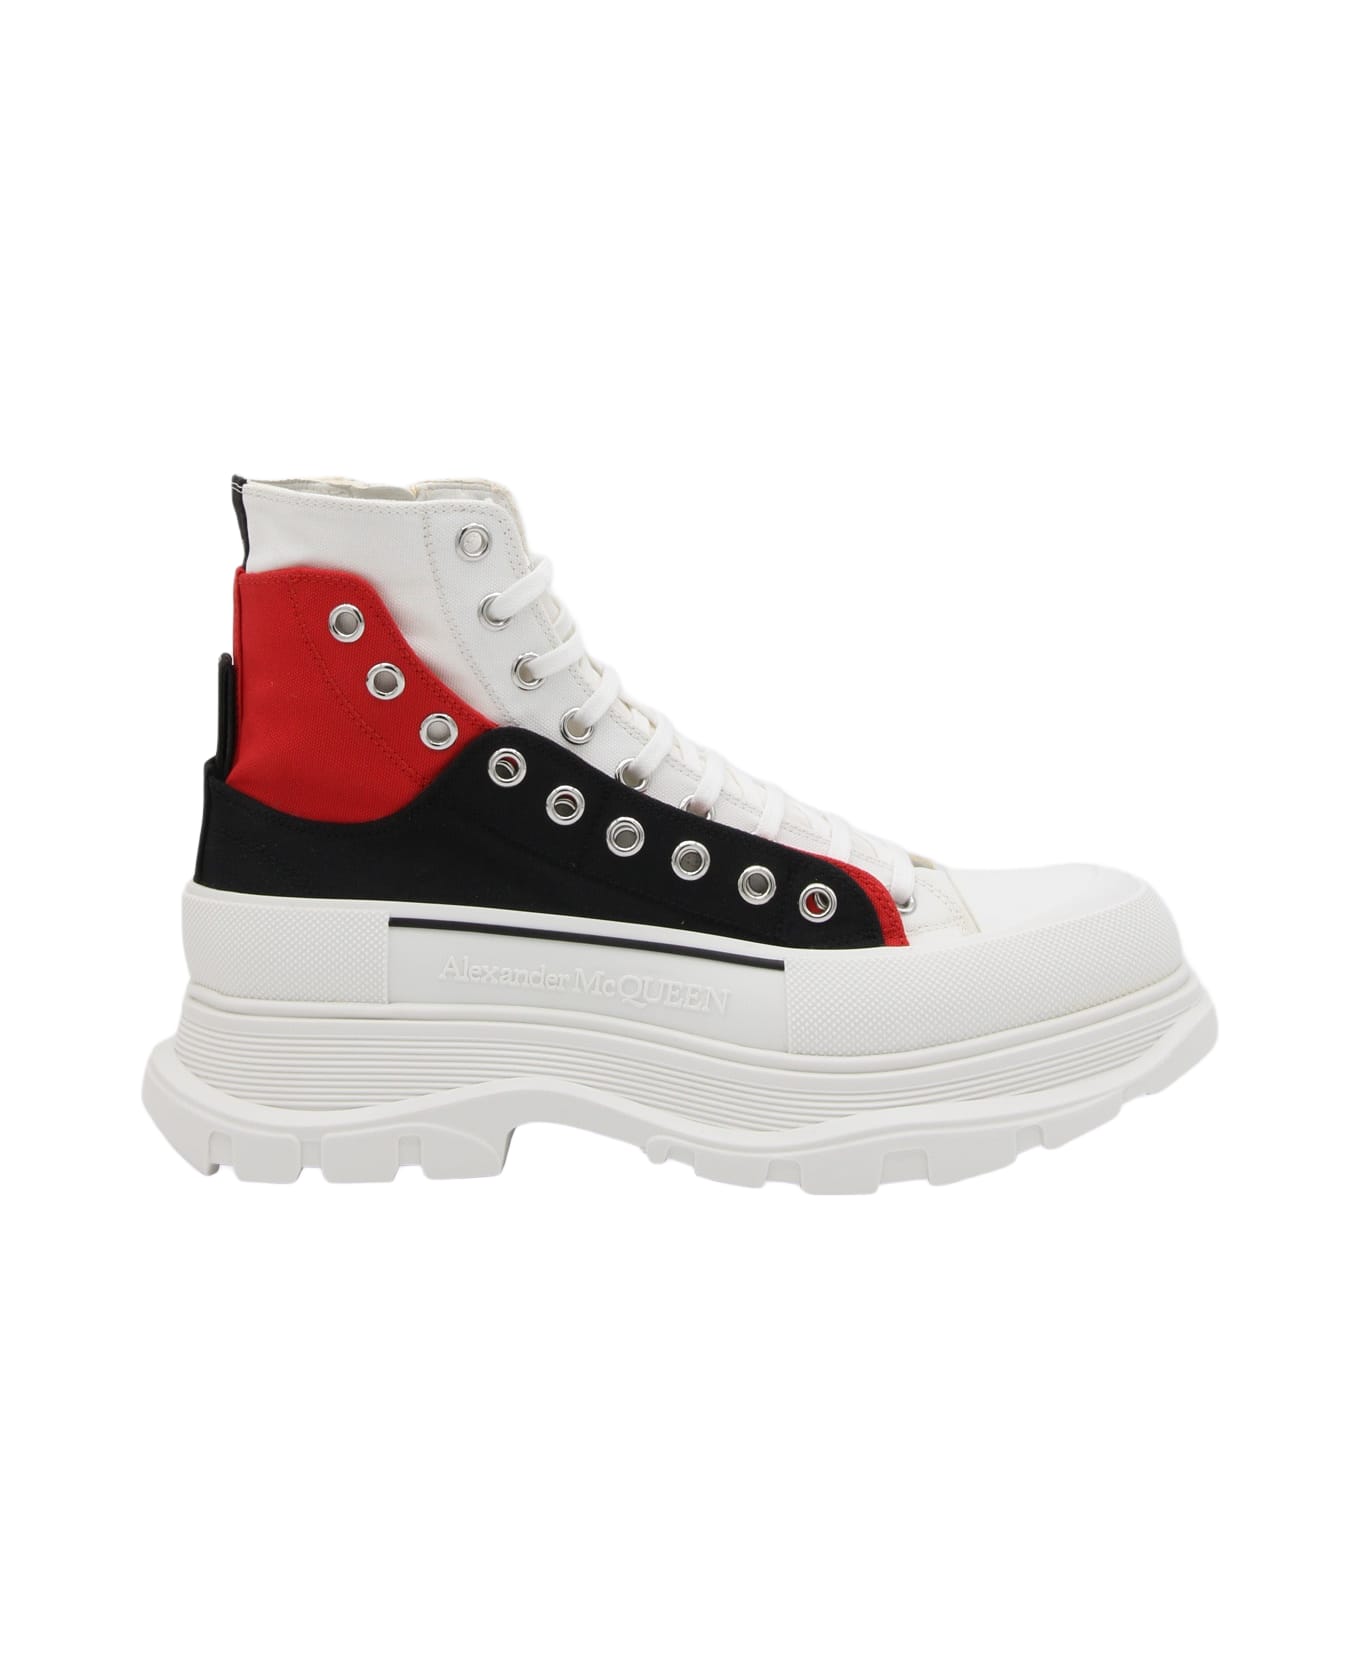 Alexander McQueen White Black And Red Canvas Boots - BLK/LR/WH